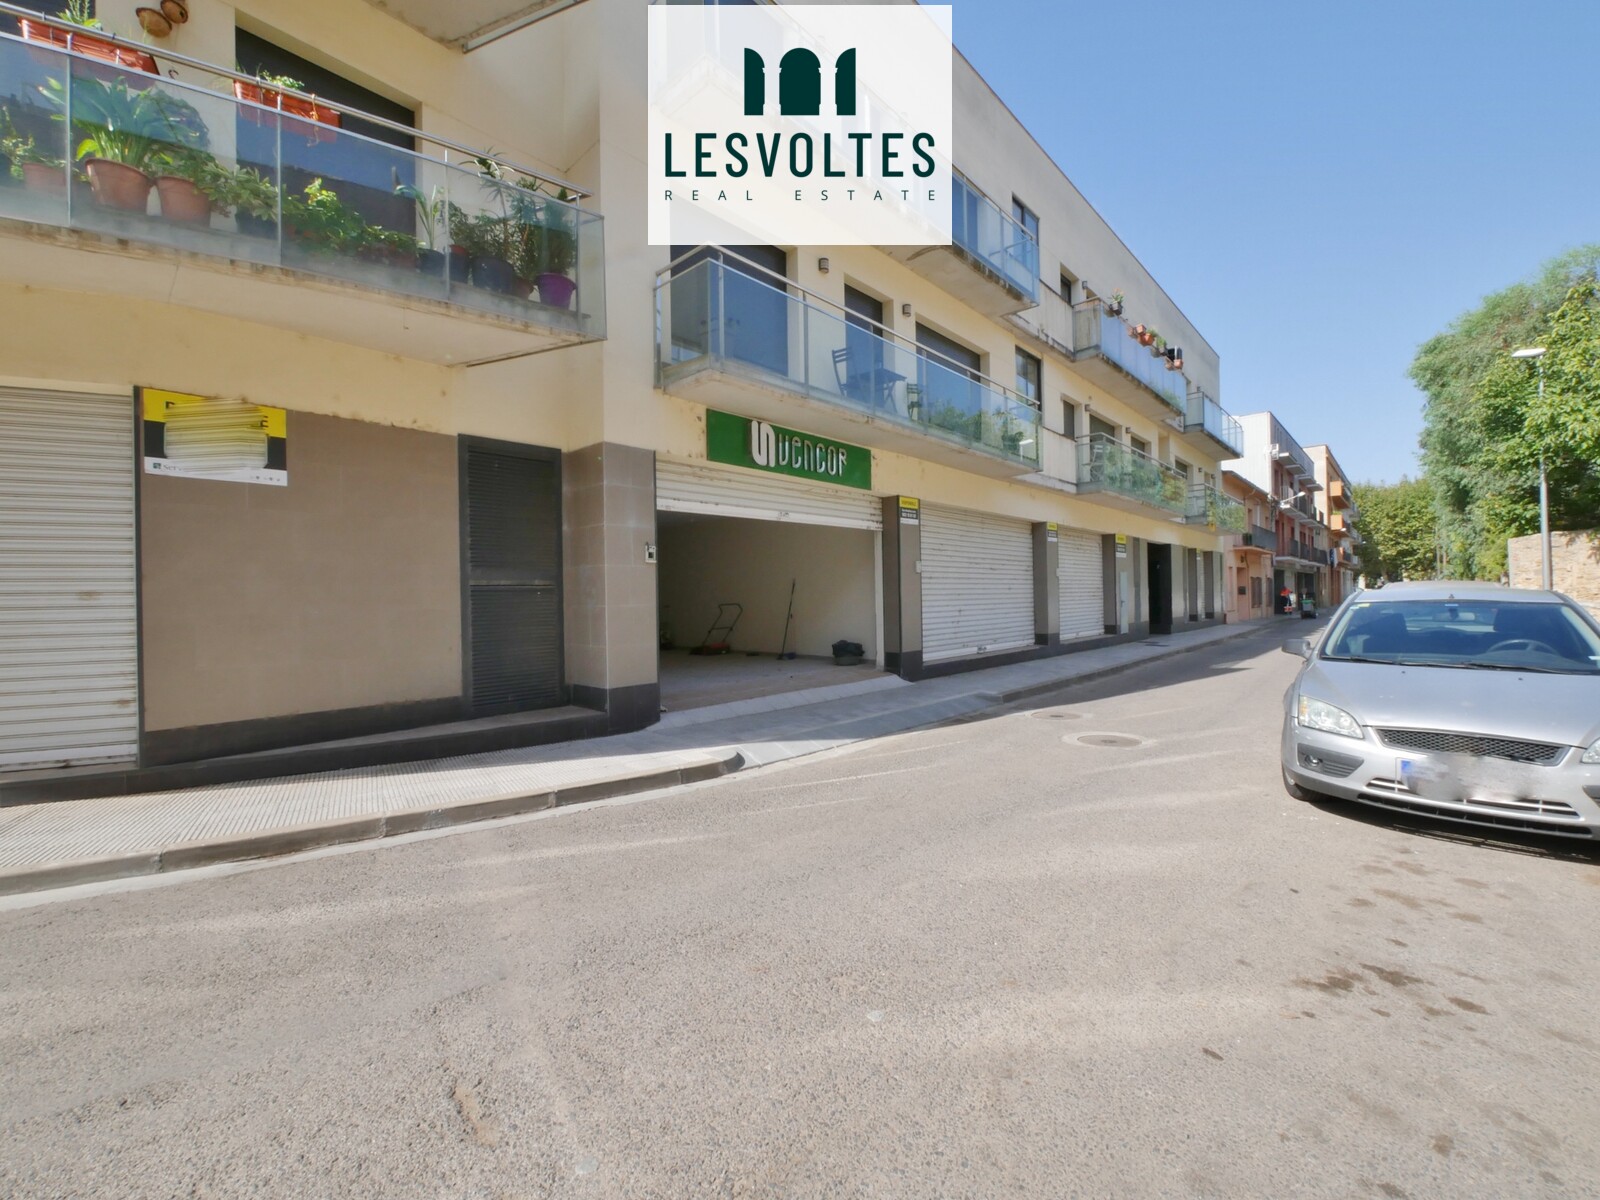  COMMERCIAL PREMISES OF 80 M2 ON THE GROUND FLOOR FOR SALE IN THE CENTER OF THE BISBAL D'EMPORDÀ. 